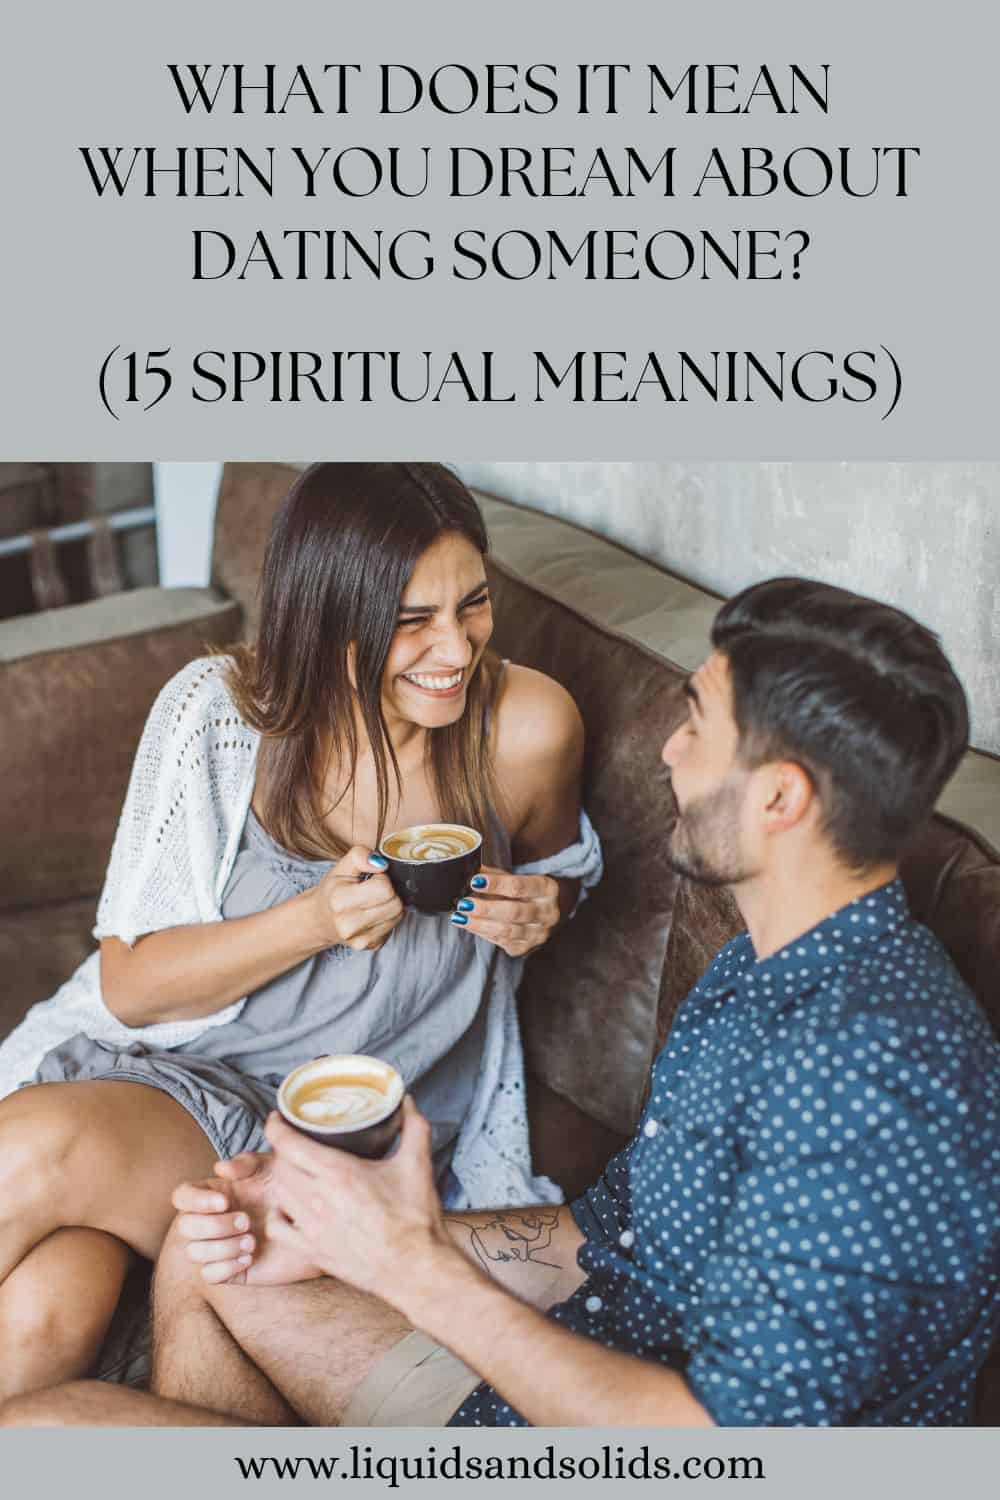 What Does It Mean When You Dream About Dating Someone? (15 Spiritual Meanings)